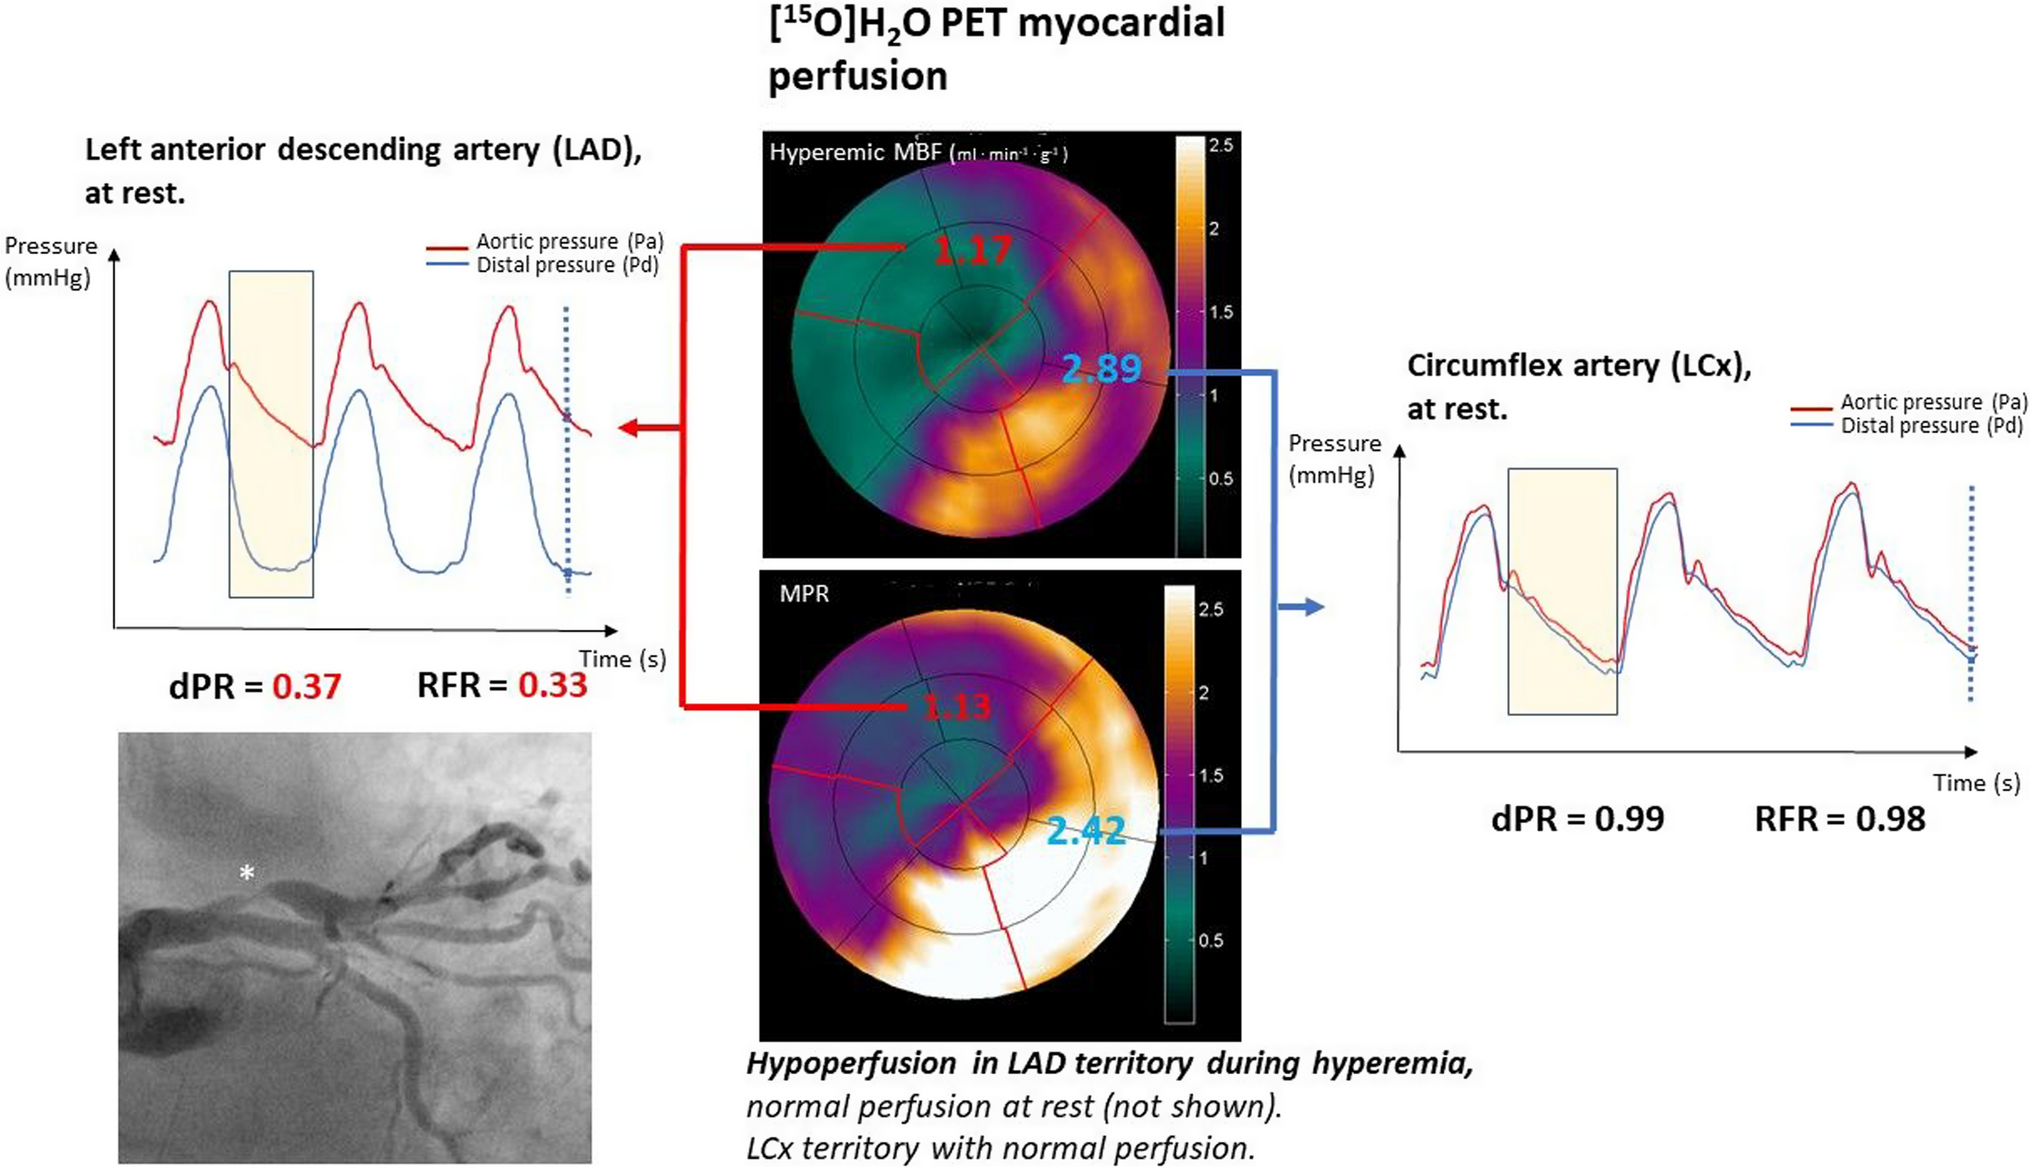 Validation of resting full-cycle ratio and diastolic pressure ratio with [15O]H2O positron emission tomography myocardial perfusion